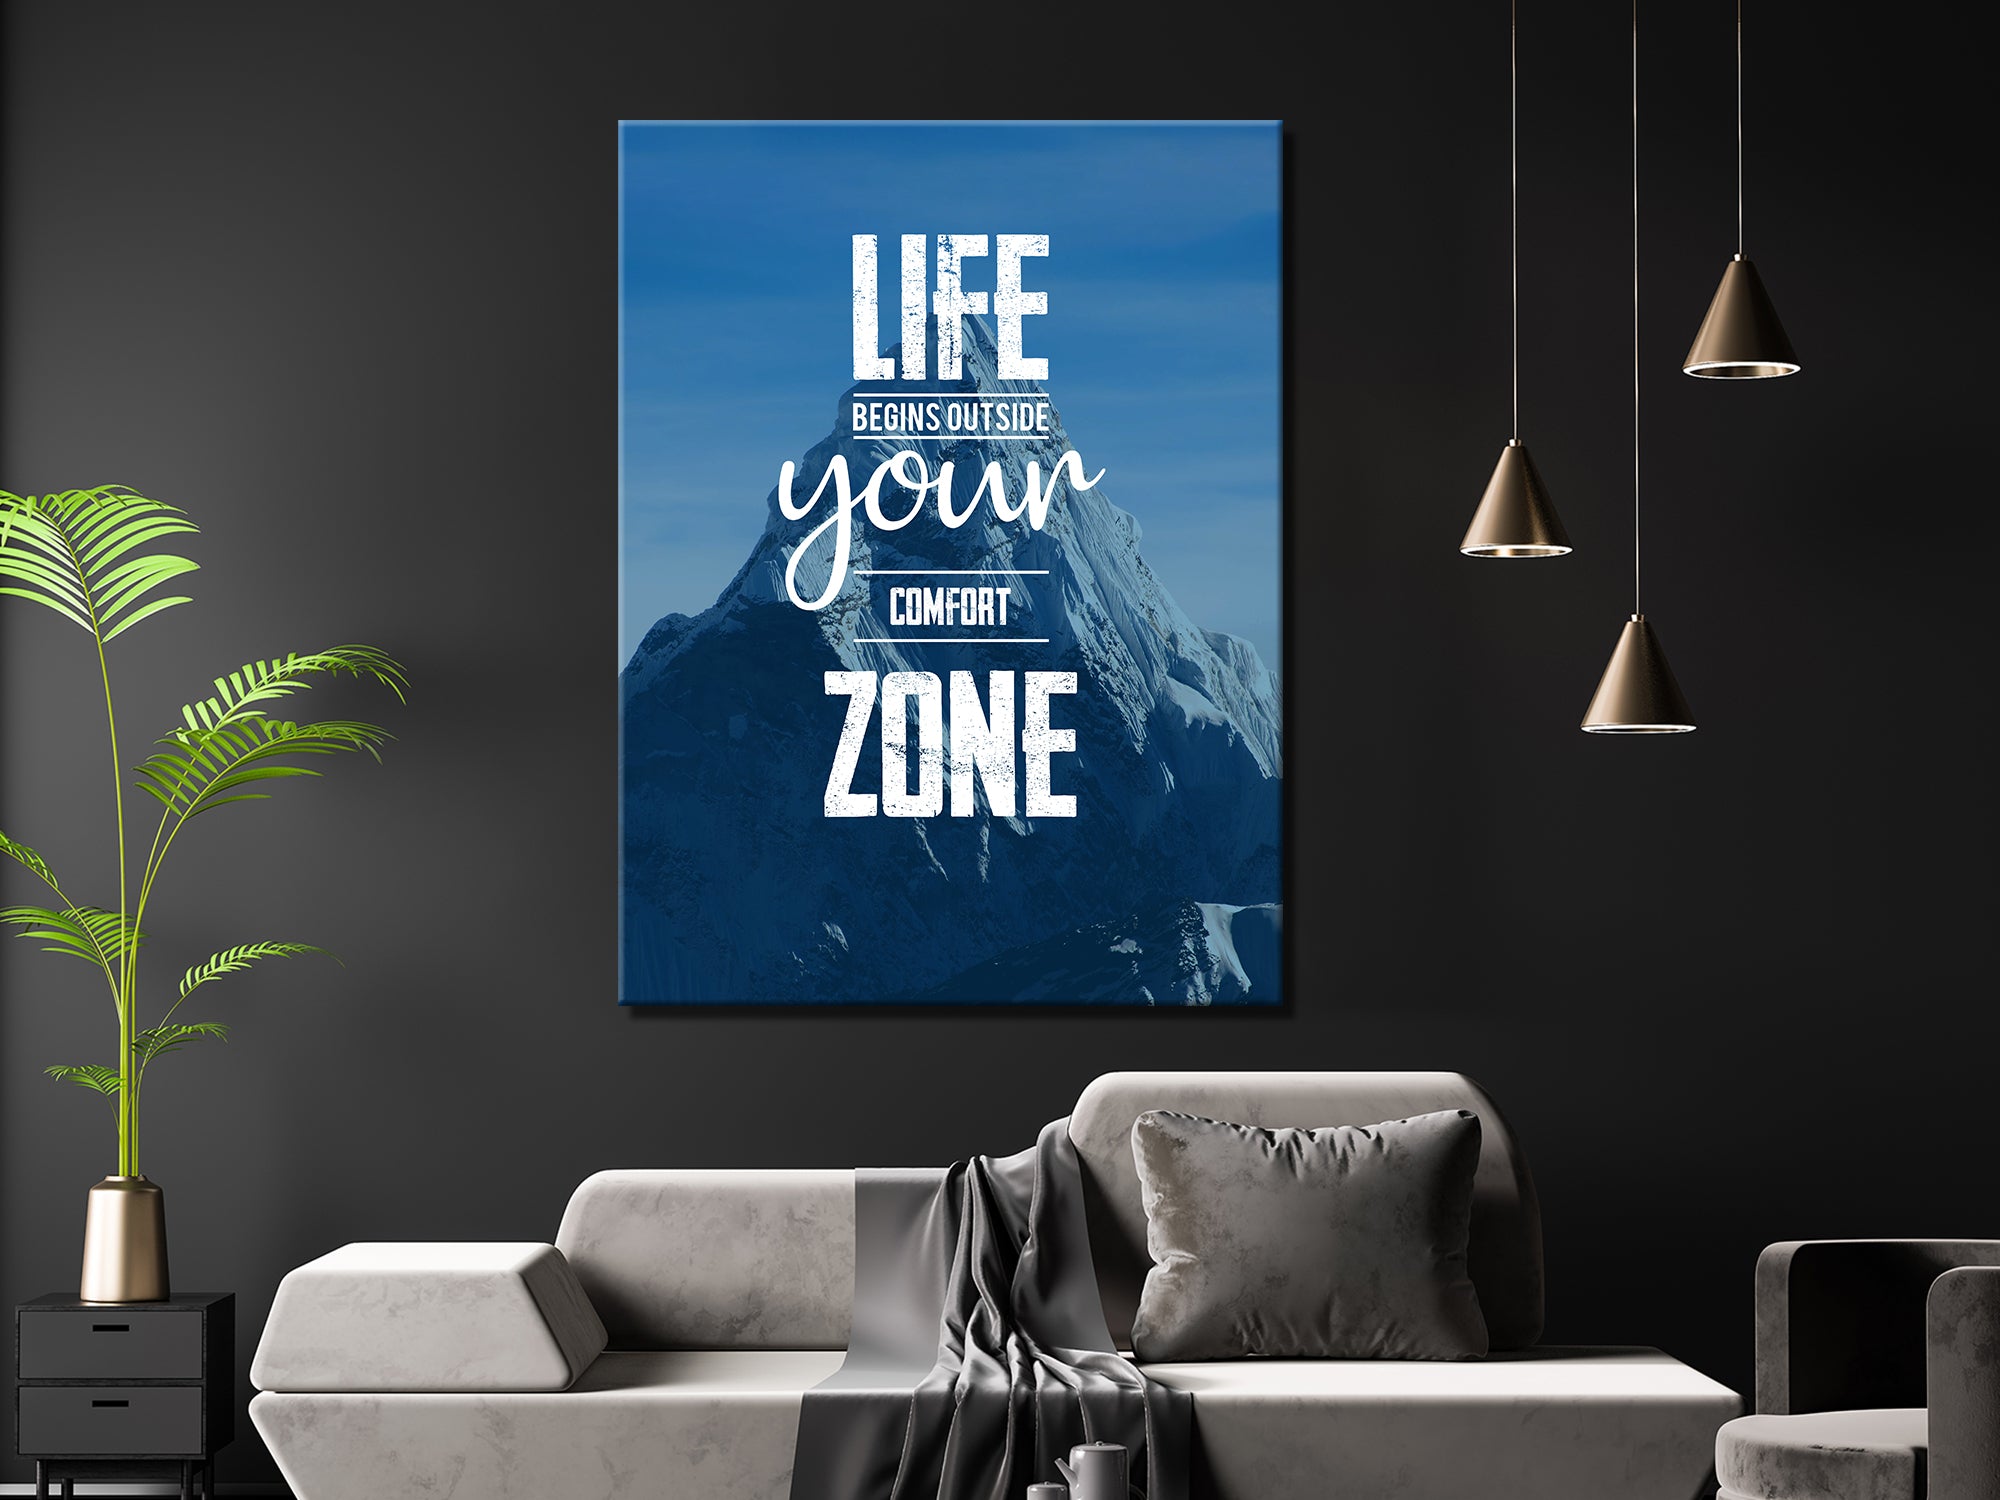 Life Begins Outside Your Comfort Zone - Inspirational Canvas Wall Art For Living Room